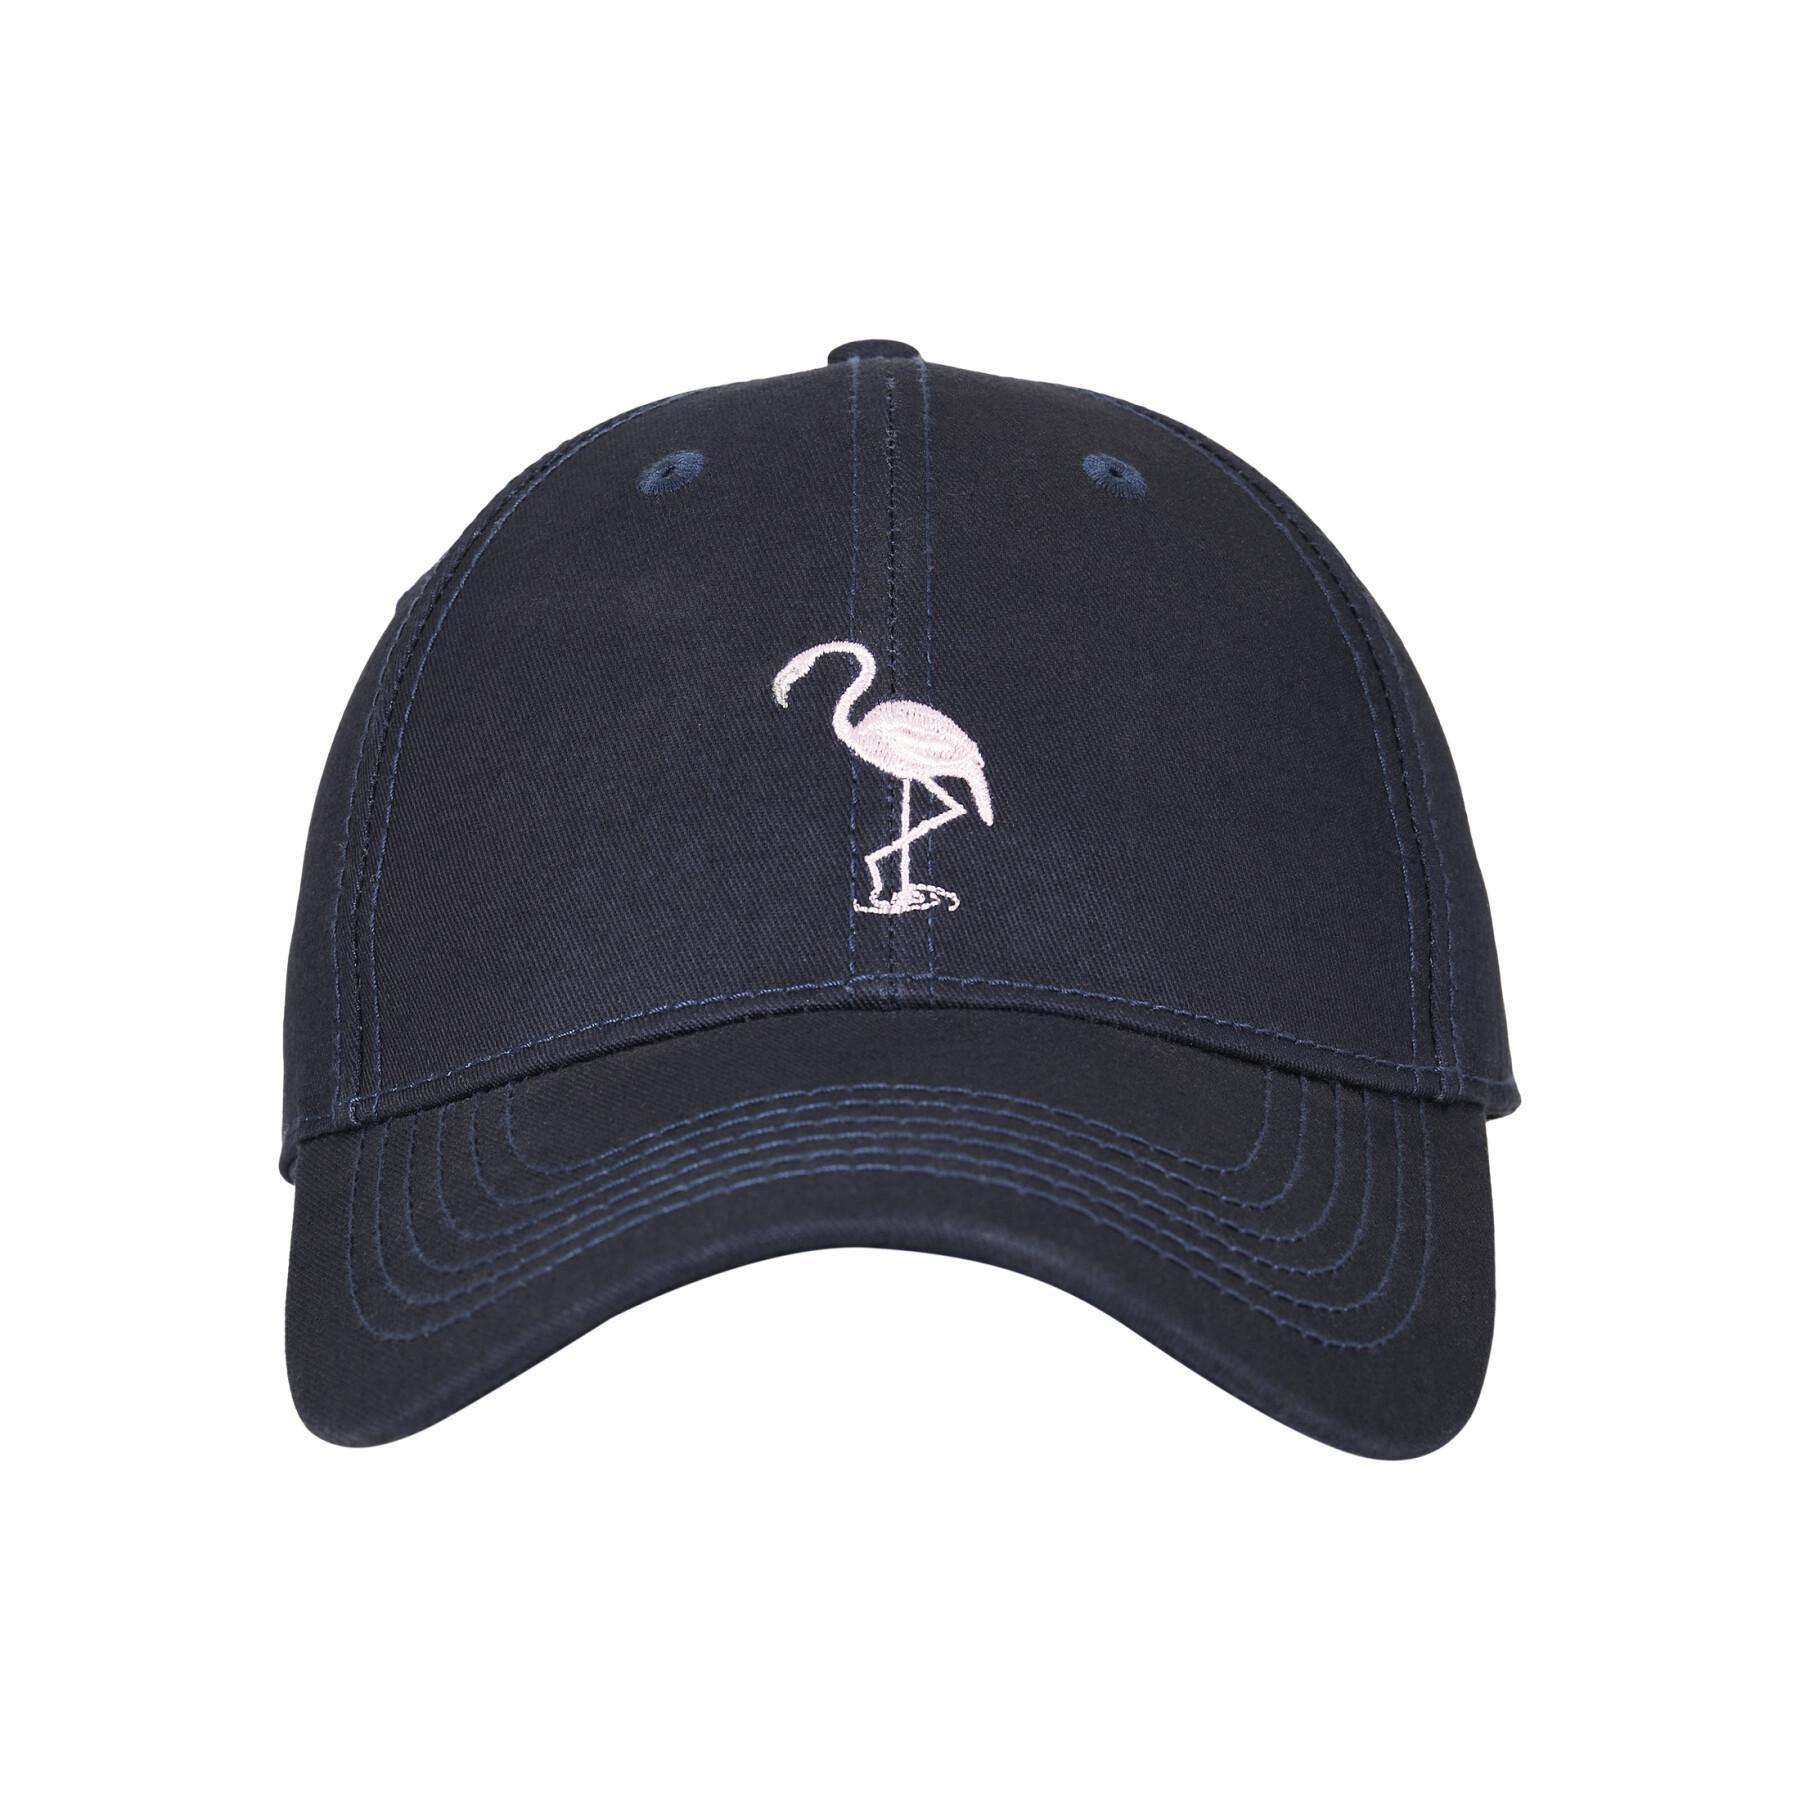 Casquette Cayler & Sons wl camingo curved